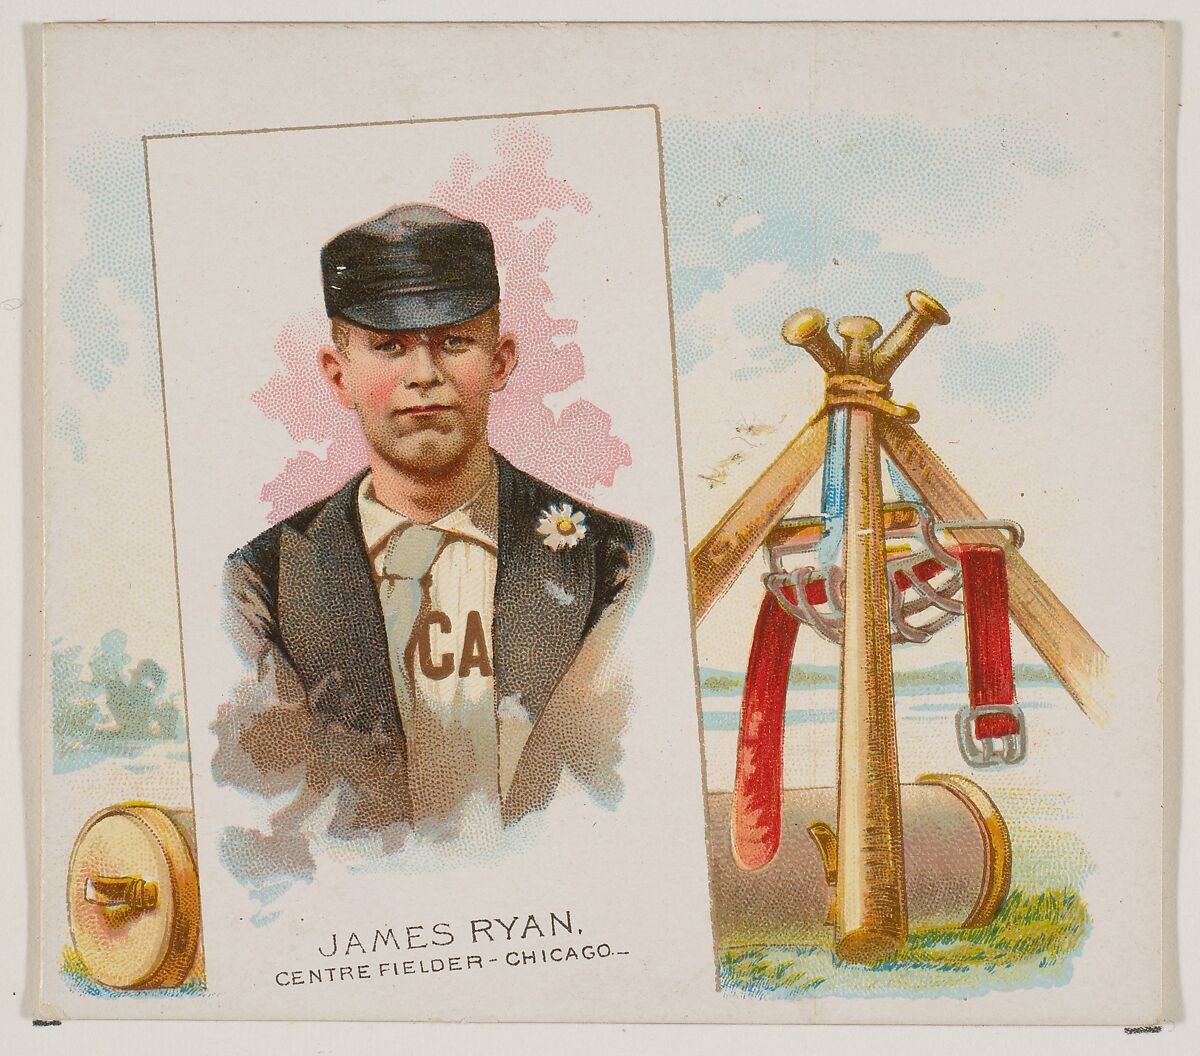 James Ryan, Center Fielder, Chicago, from World's Champions, Second Series (N43) for Allen & Ginter Cigarettes, Allen &amp; Ginter (American, Richmond, Virginia), Commercial lithograph 